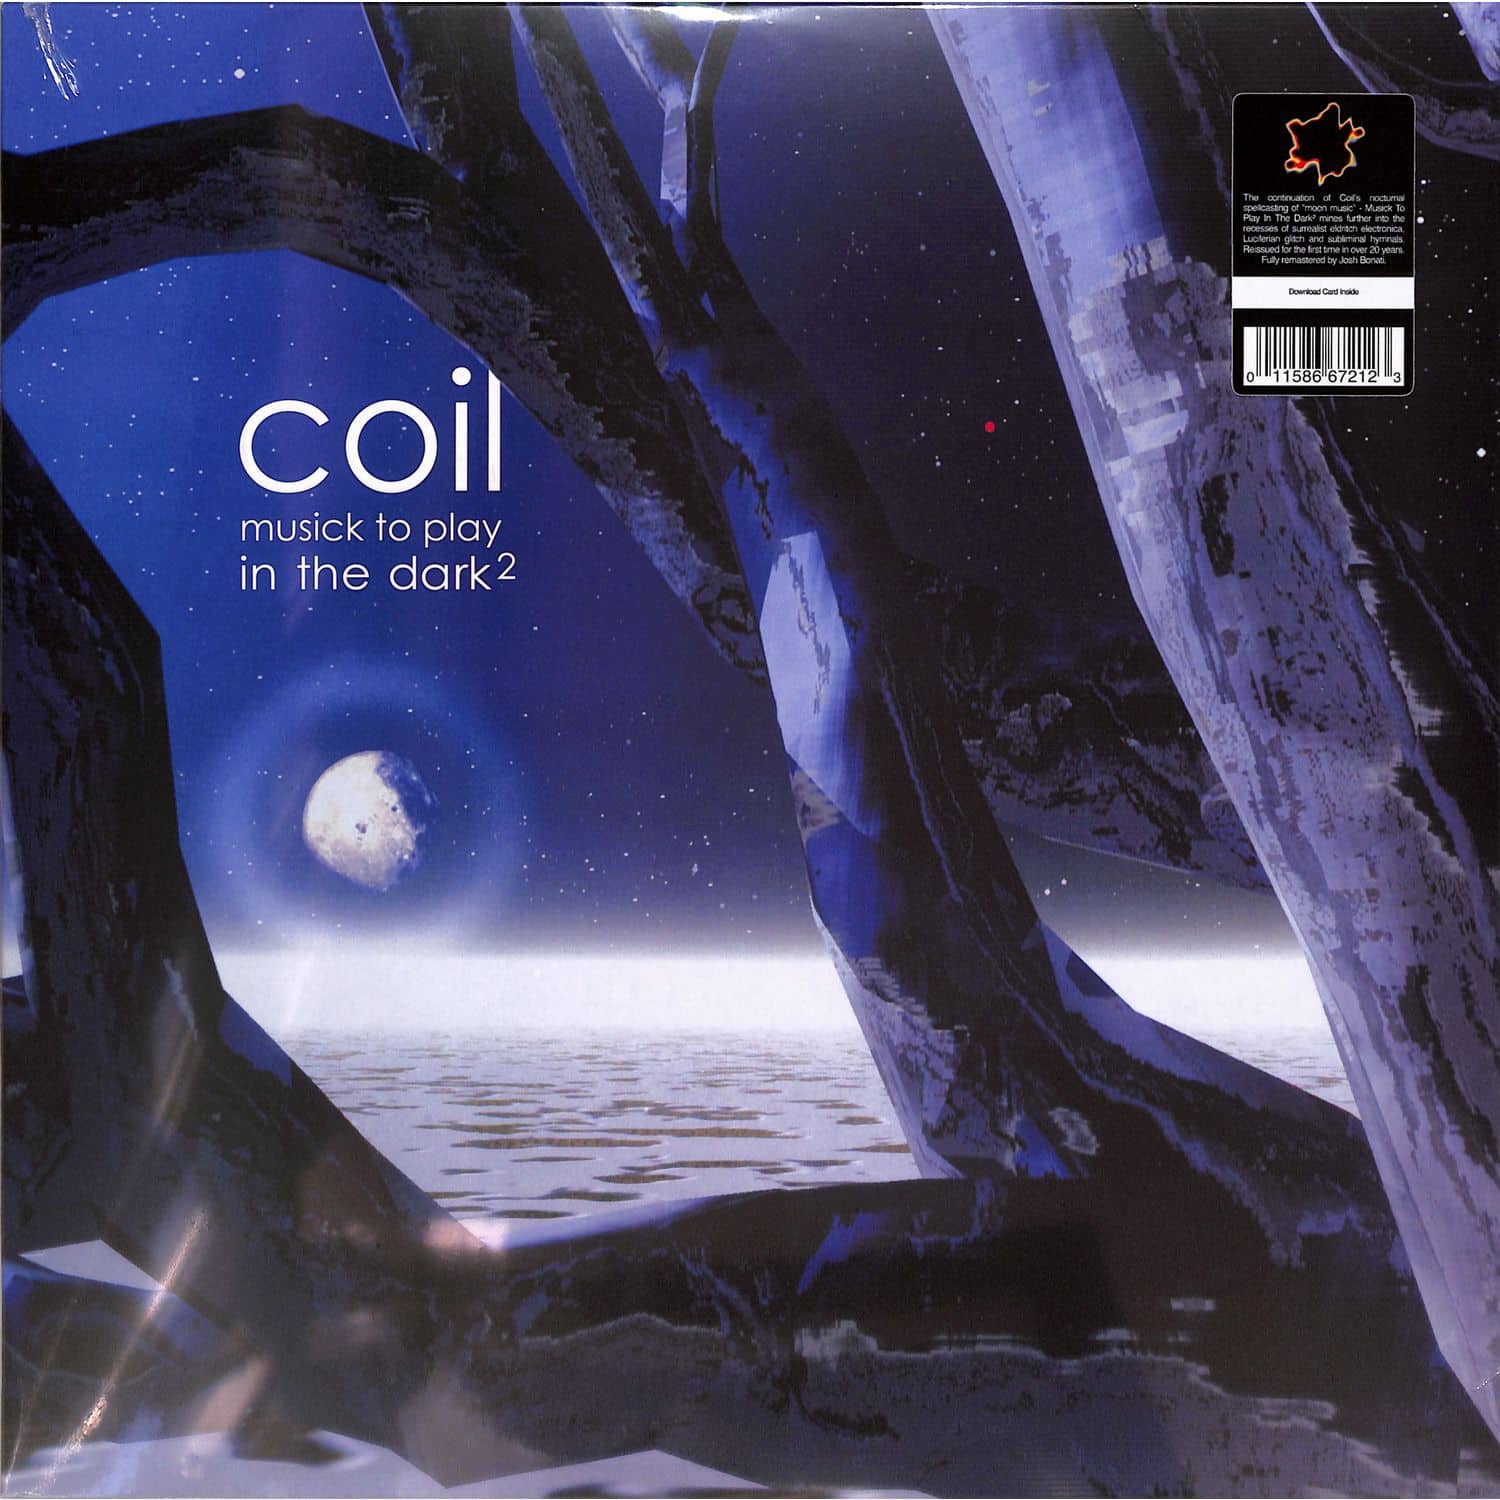 Coil - MUSICK TO PLAY IN THE DARK2 